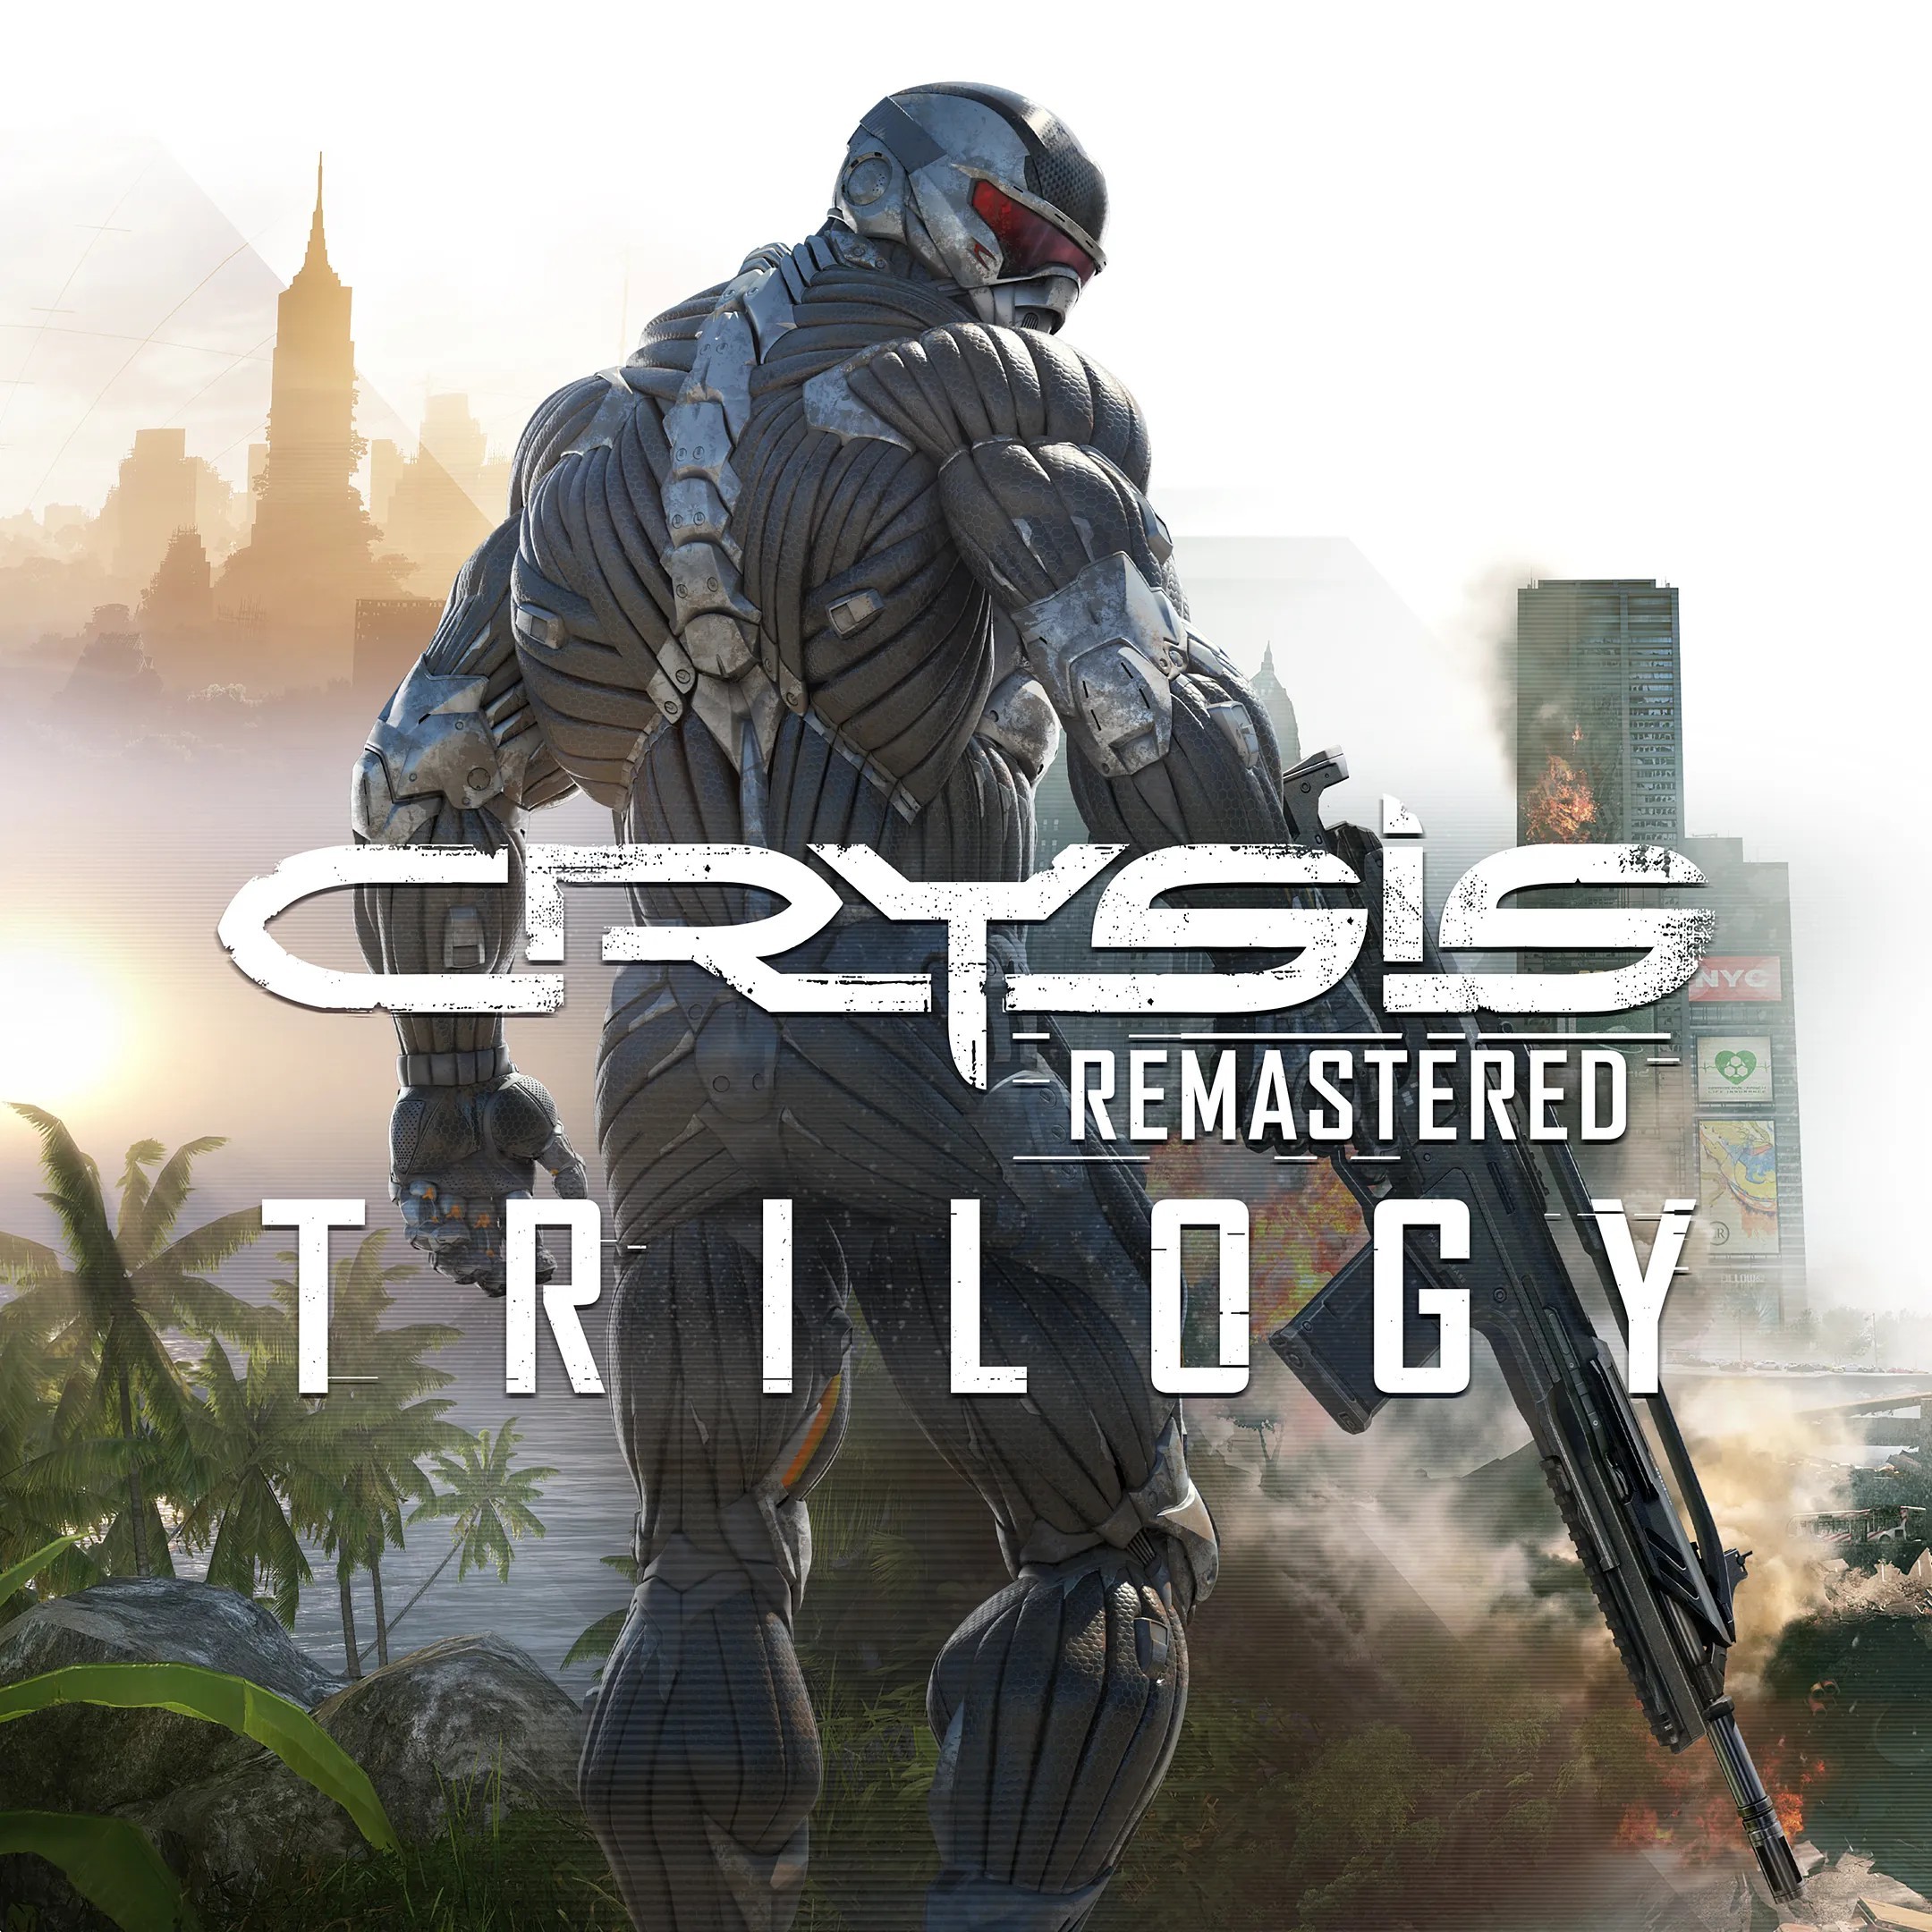 Crysis ps4. Crysis Remastered Trilogy ps4. Crysis Remastered Xbox one. Crysis Remastered Trilogy Xbox. Crysis Remastered ps4 диск.